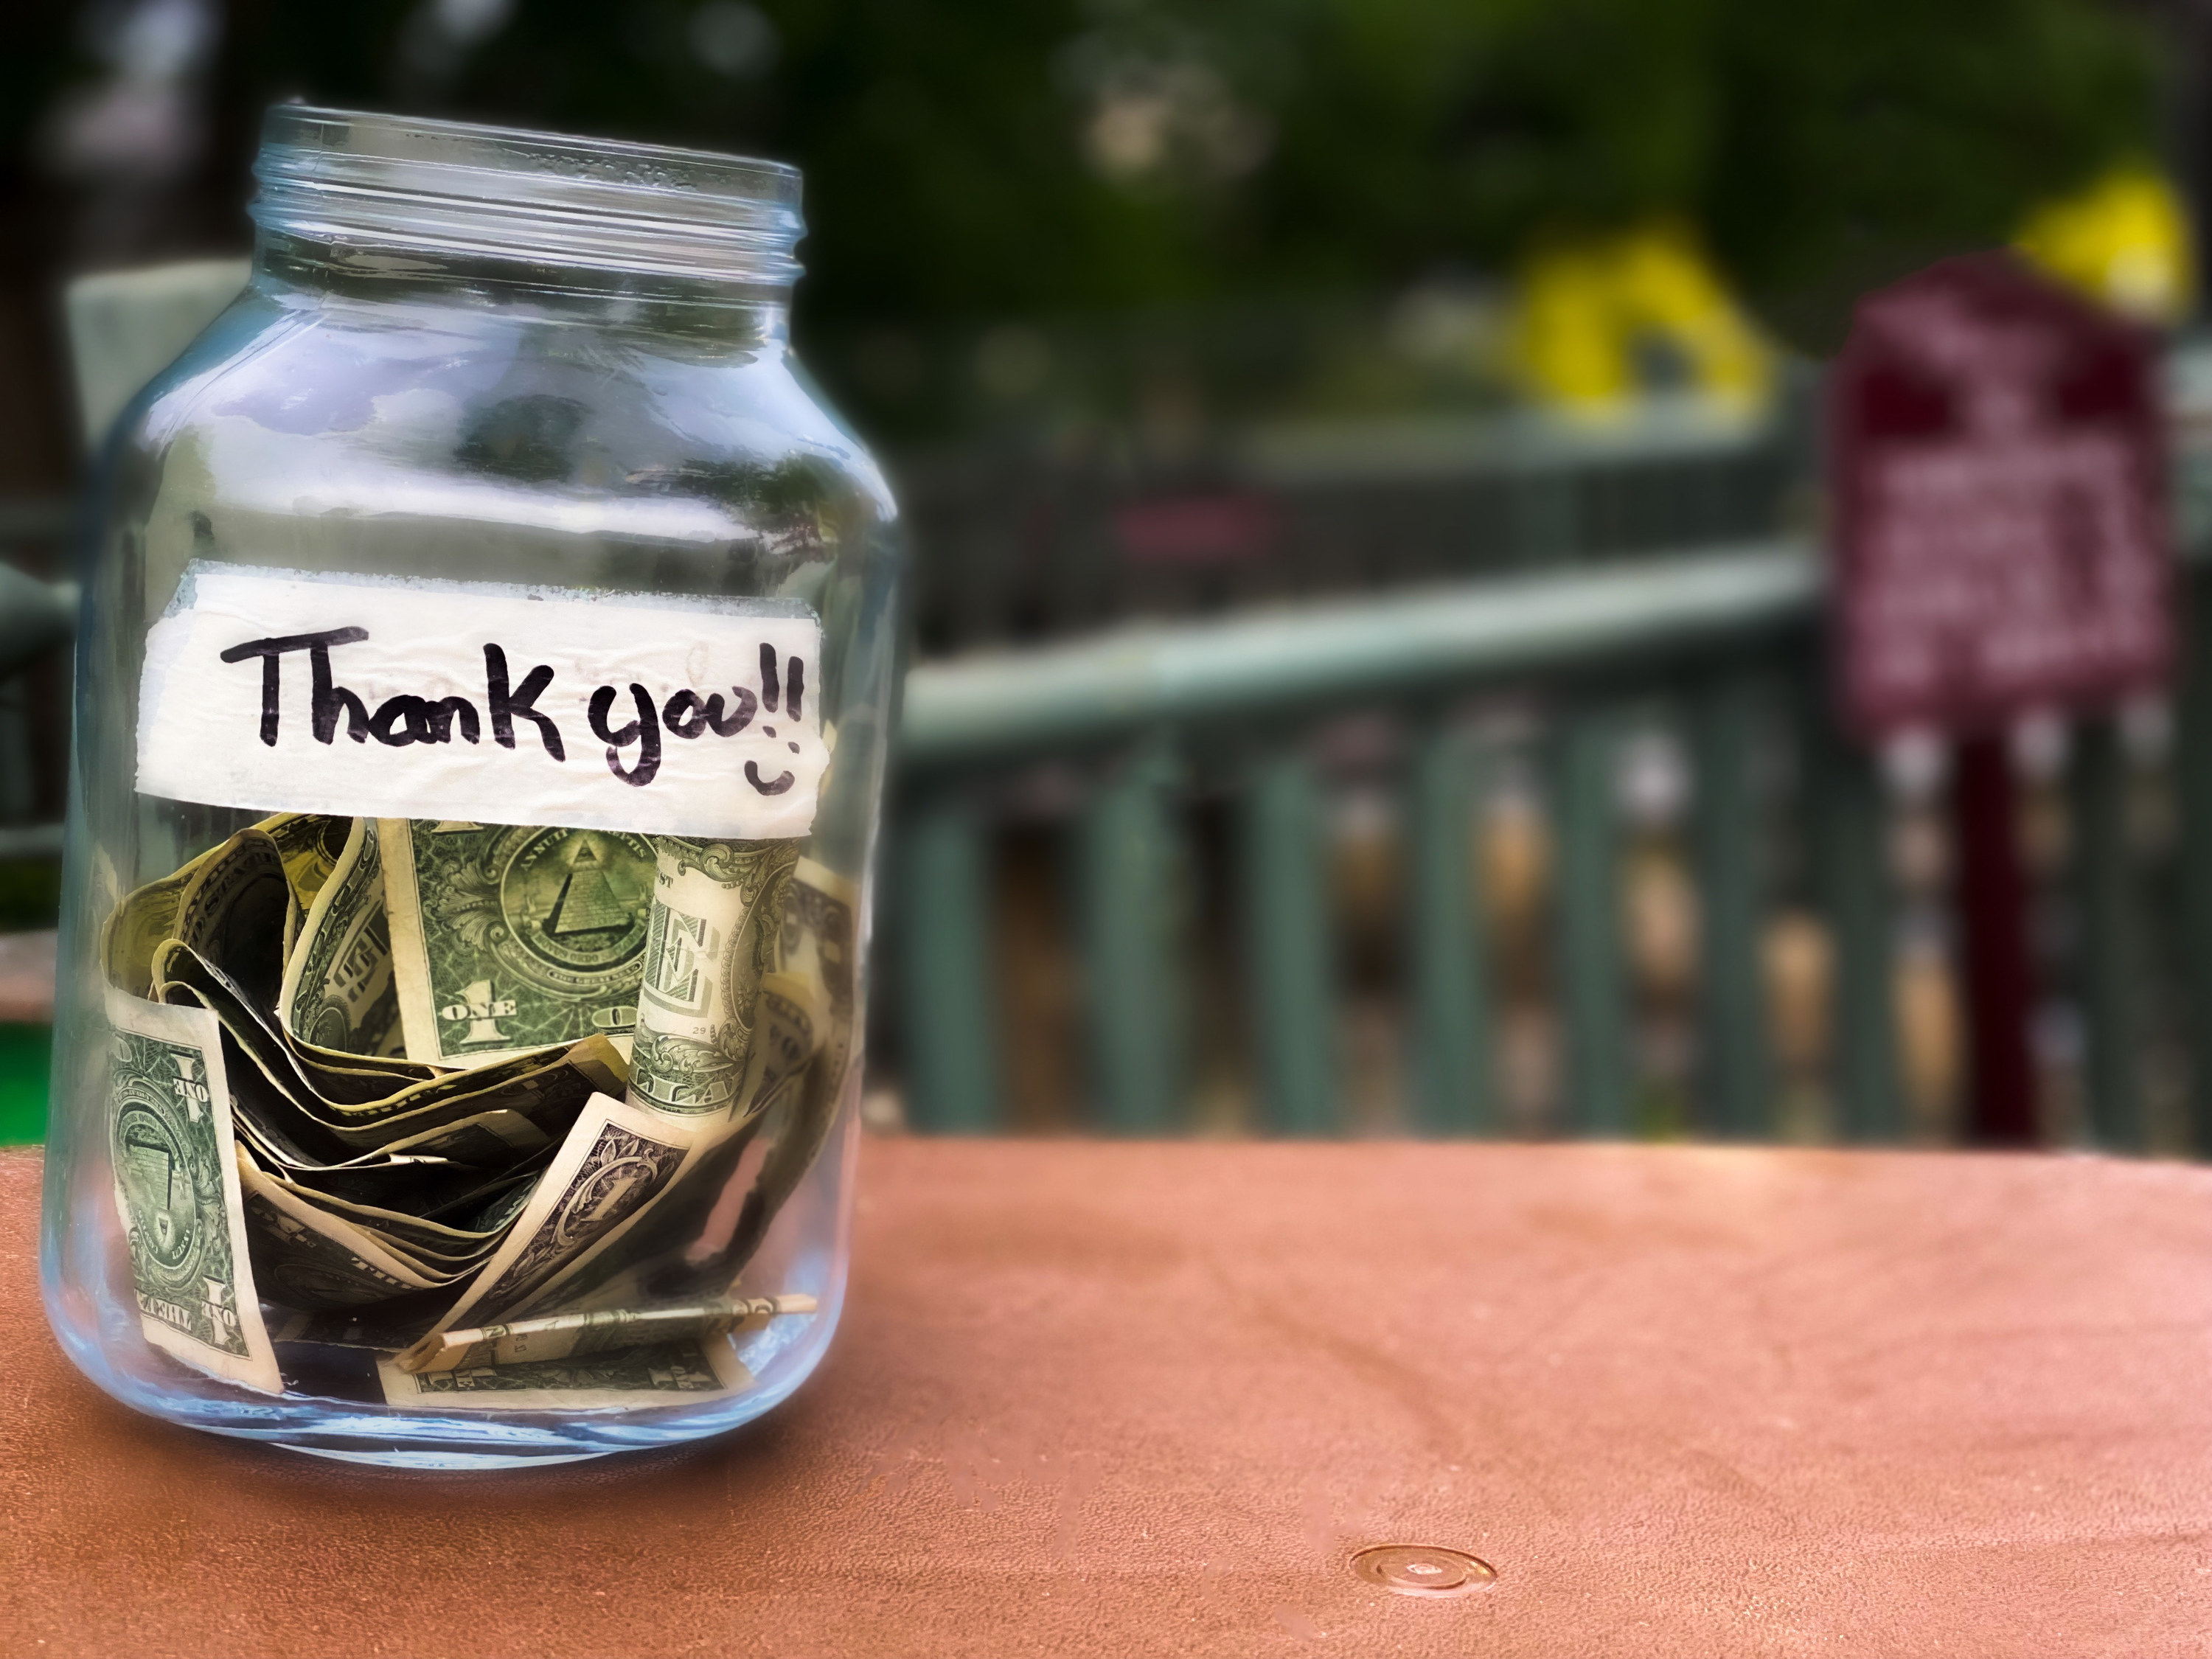 Tip jar with a note that says &quot;Thank you!&quot;